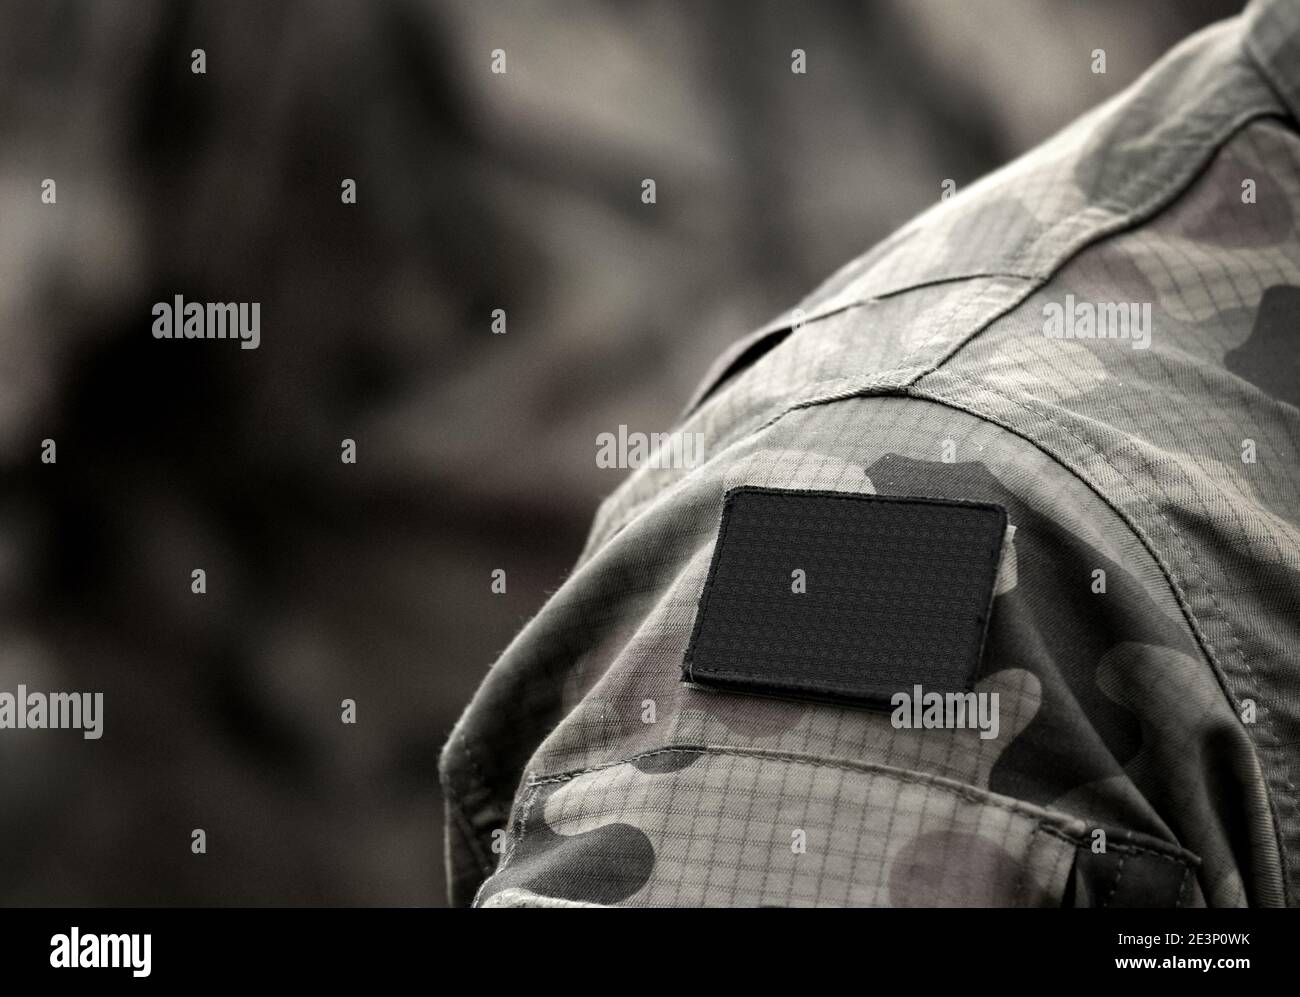 Anarchism flag on military uniform. Black flag is the traditional anarchist symbol. Stock Photo